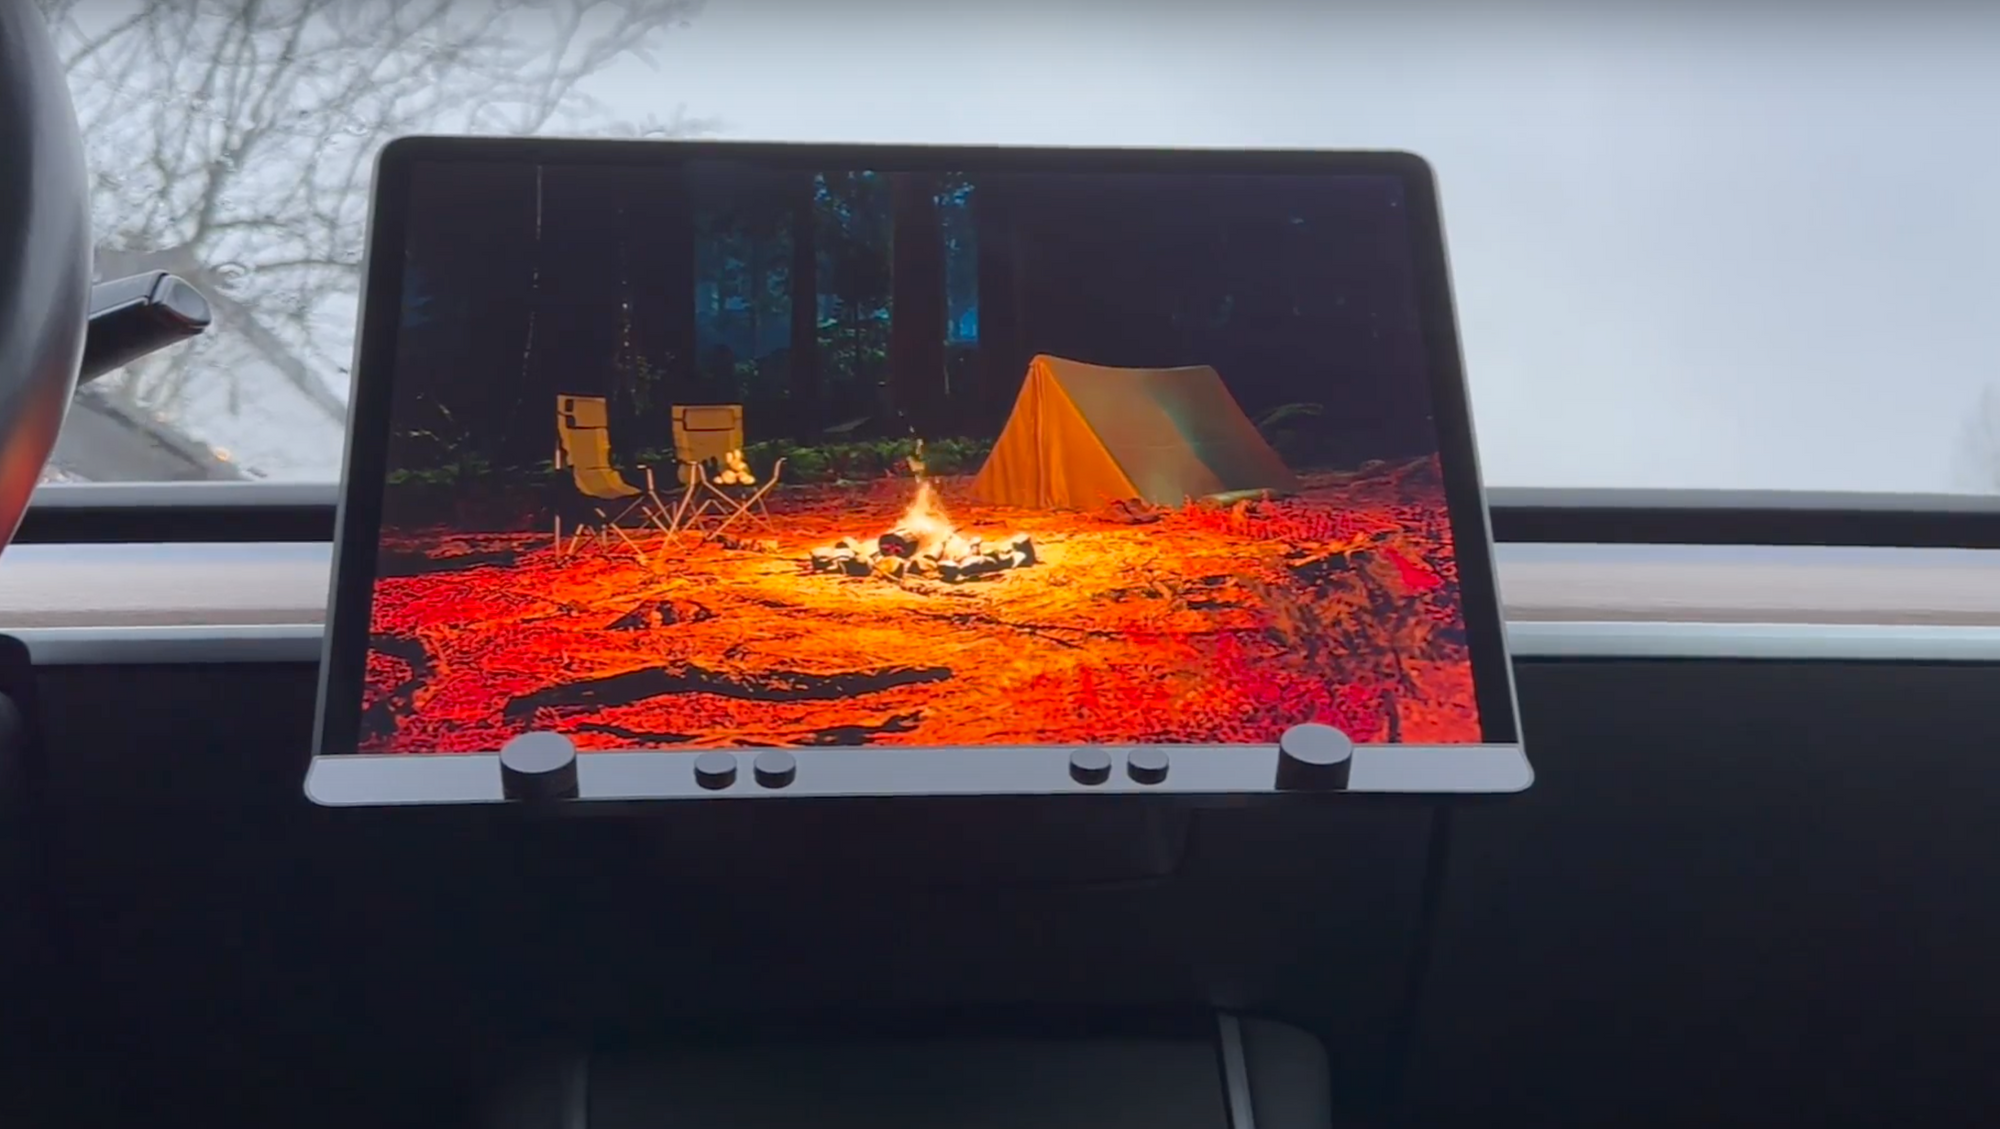 Embracing Autumn with Tesla's Cozy Fireplace Feature